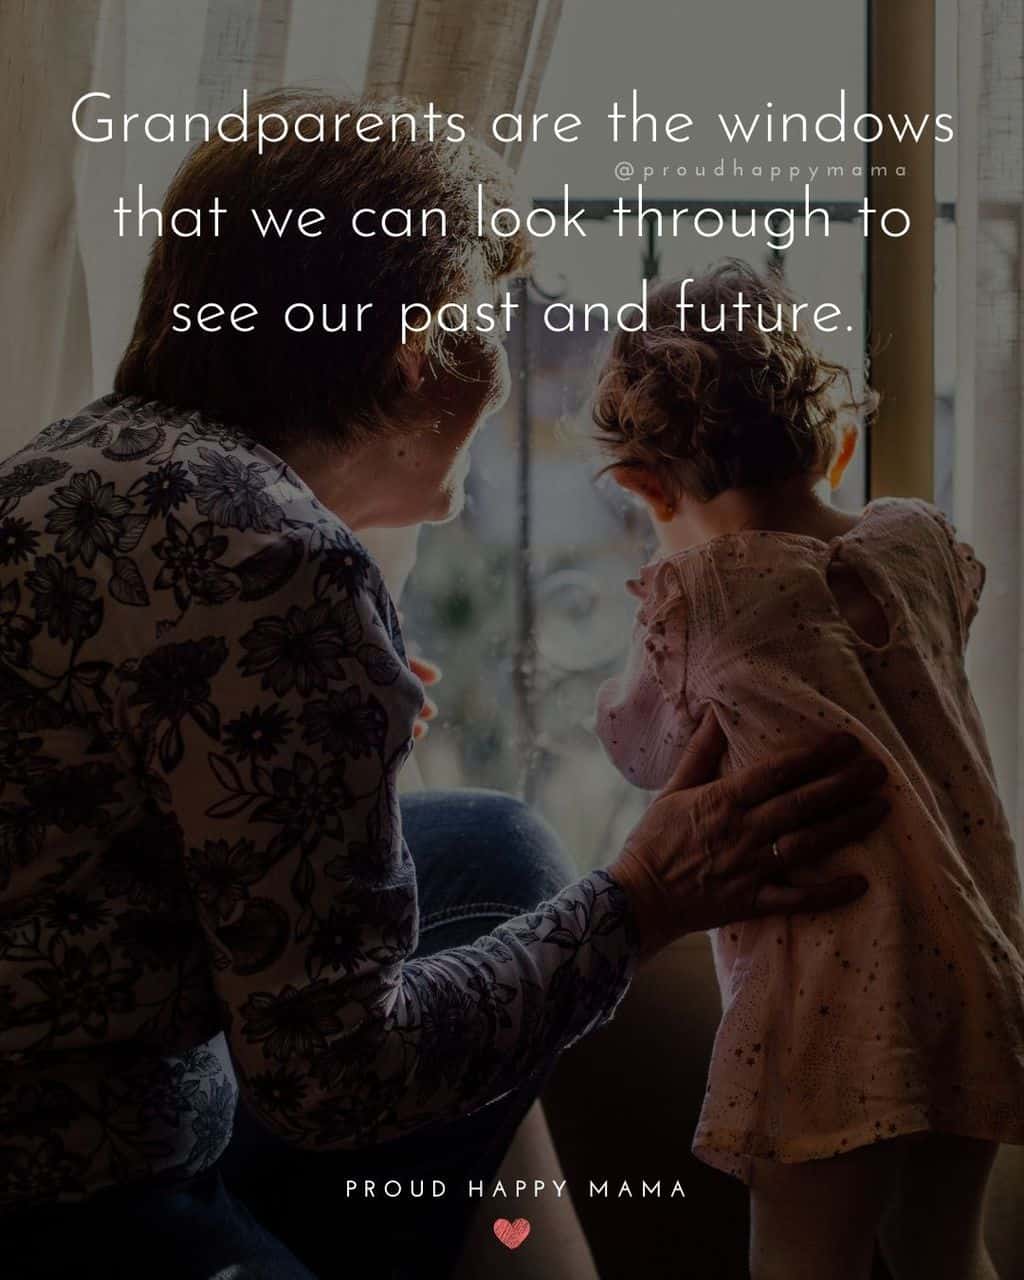 Grandparent Quotes – Grandparents are the windows that we can look through to see our past and future.’